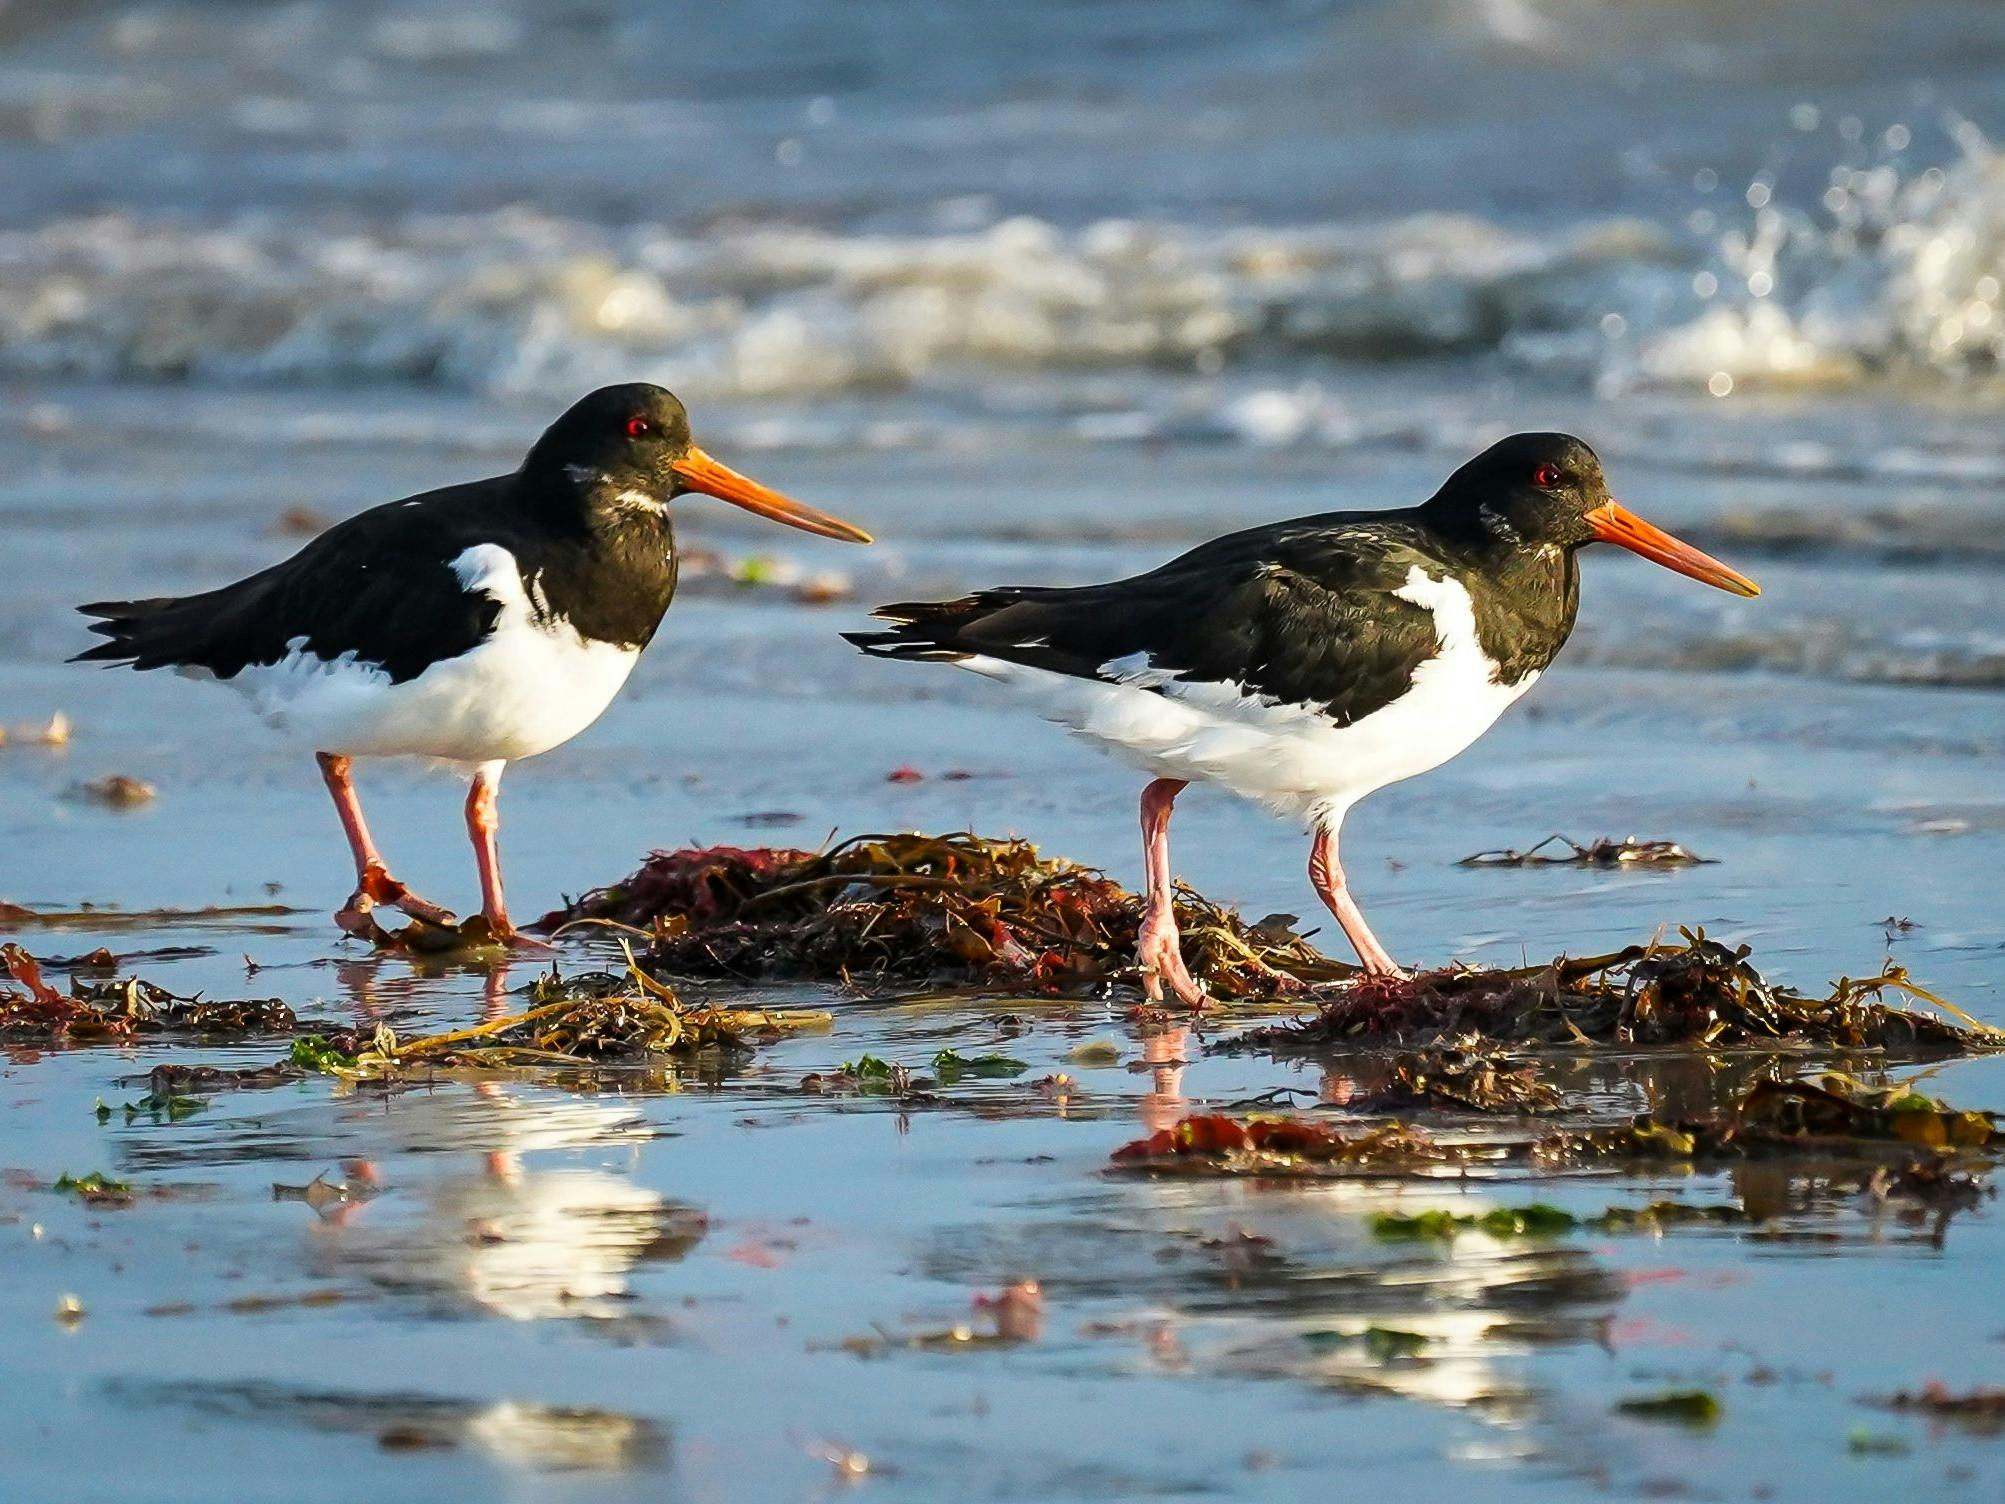 A pair of turnstone birds amongst seaweed on the sand with the shallow seas in the background